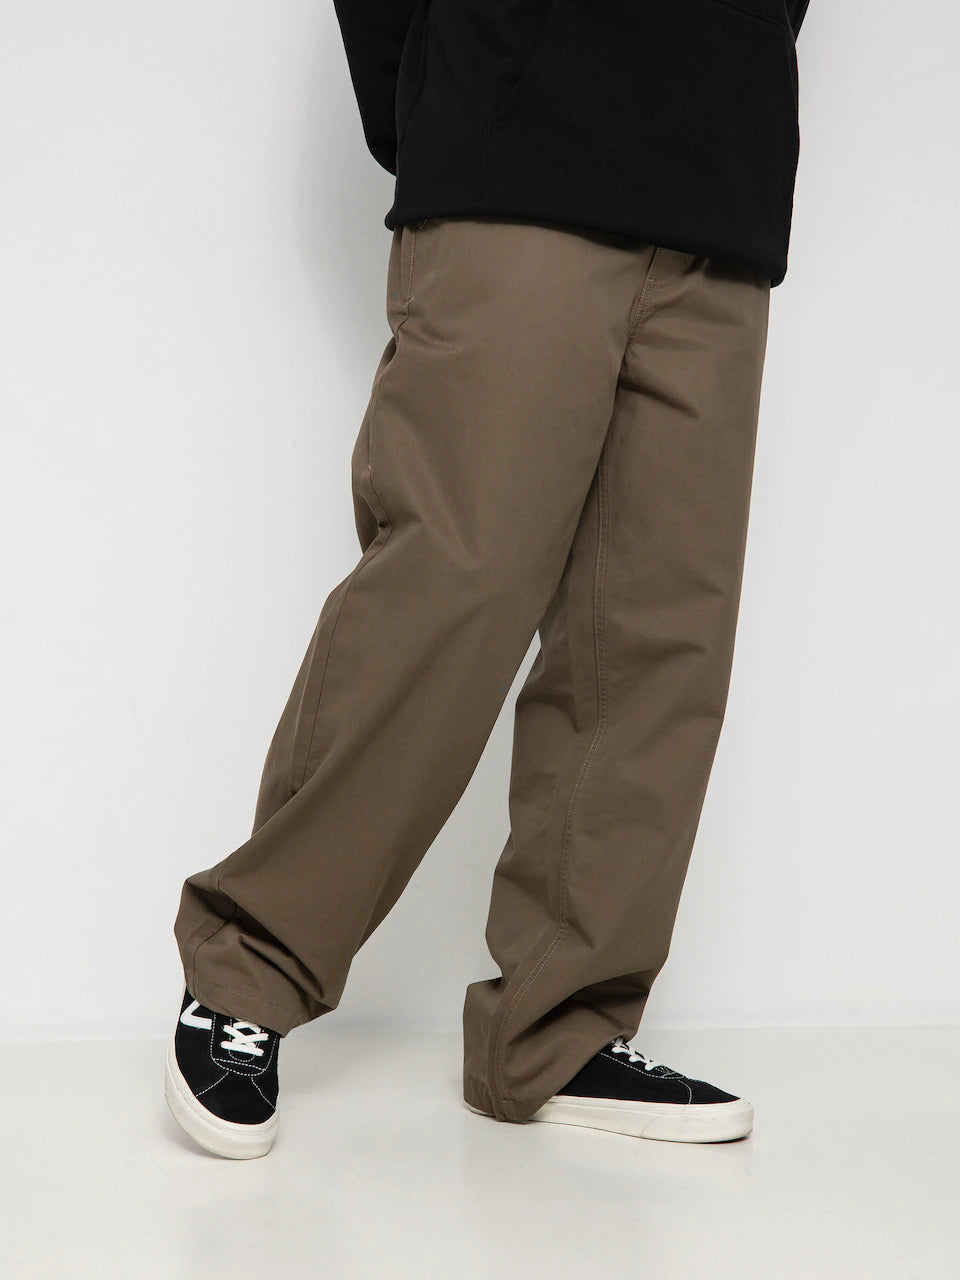 Vans Authenic Chino Baggy Pant Canteen